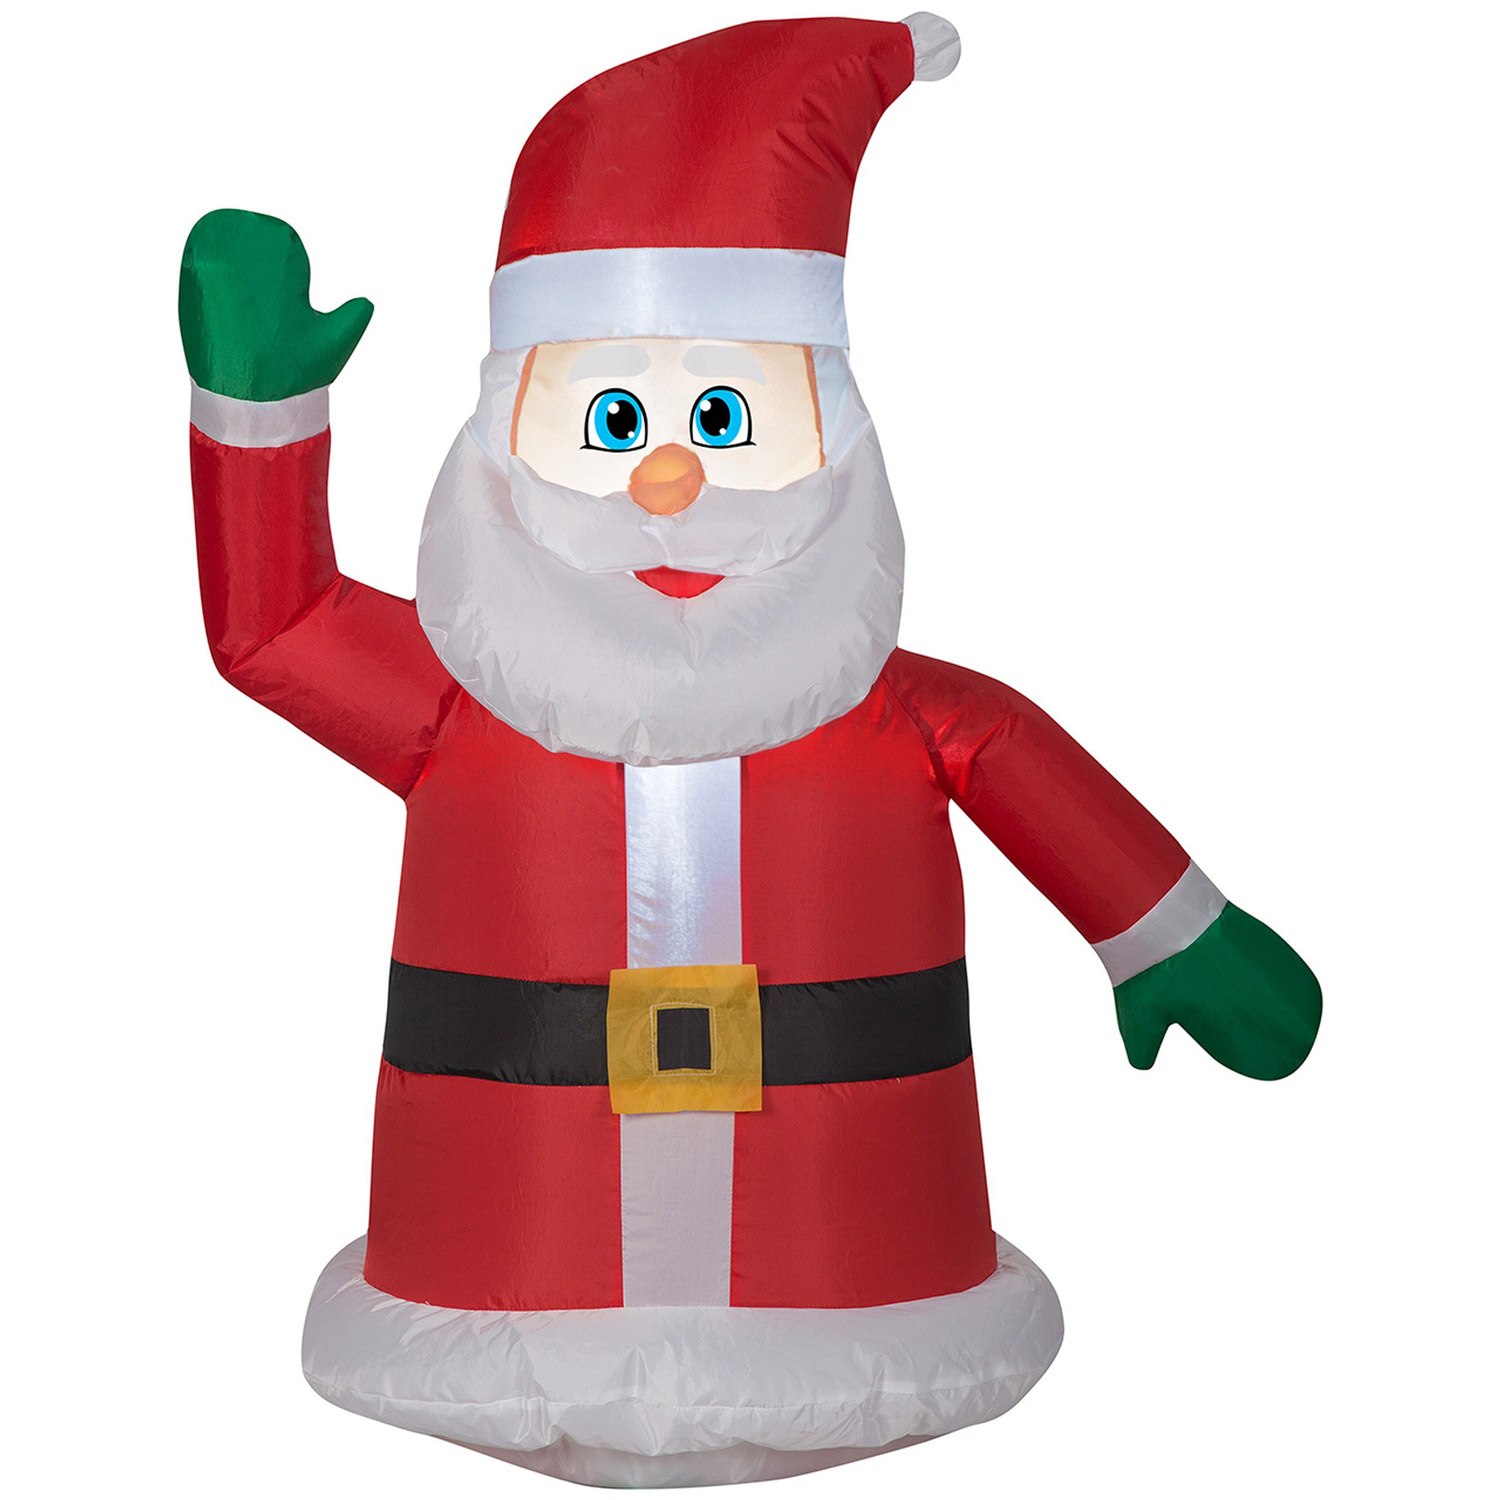 Inflatable Christmas Characters For The Car - Carbuddy passenger seat inflatable Christmas characters